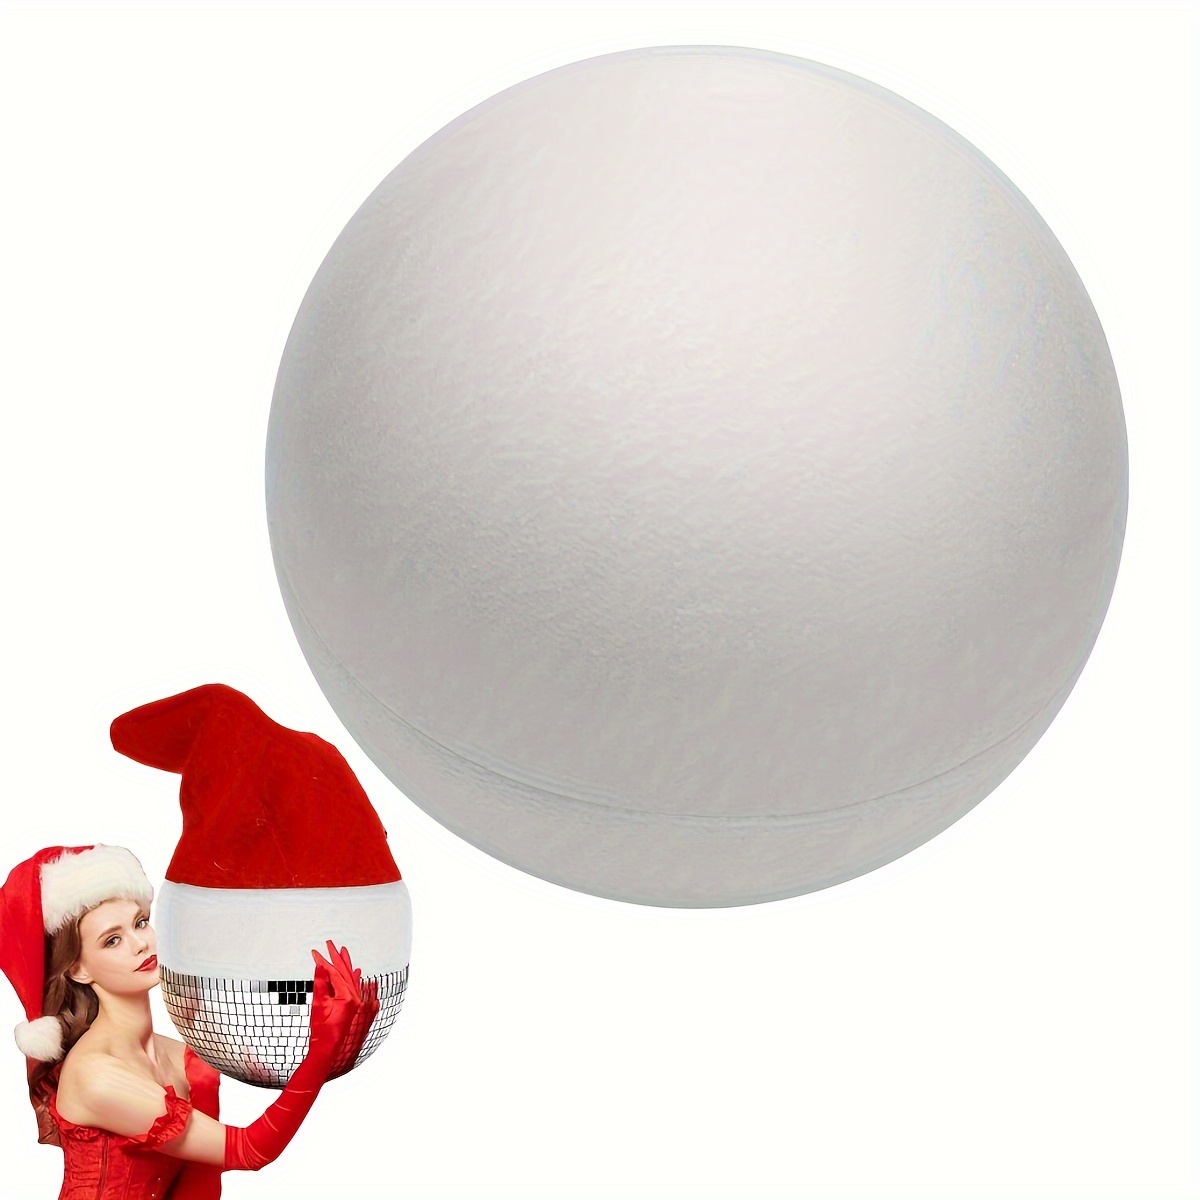 LOMIMOS 40pcs 3 inch Foam Balls, White Craft Balls for Arts & Crafts DIY Crafts Making Ornaments Decoration School Projects Easter Christmas Party